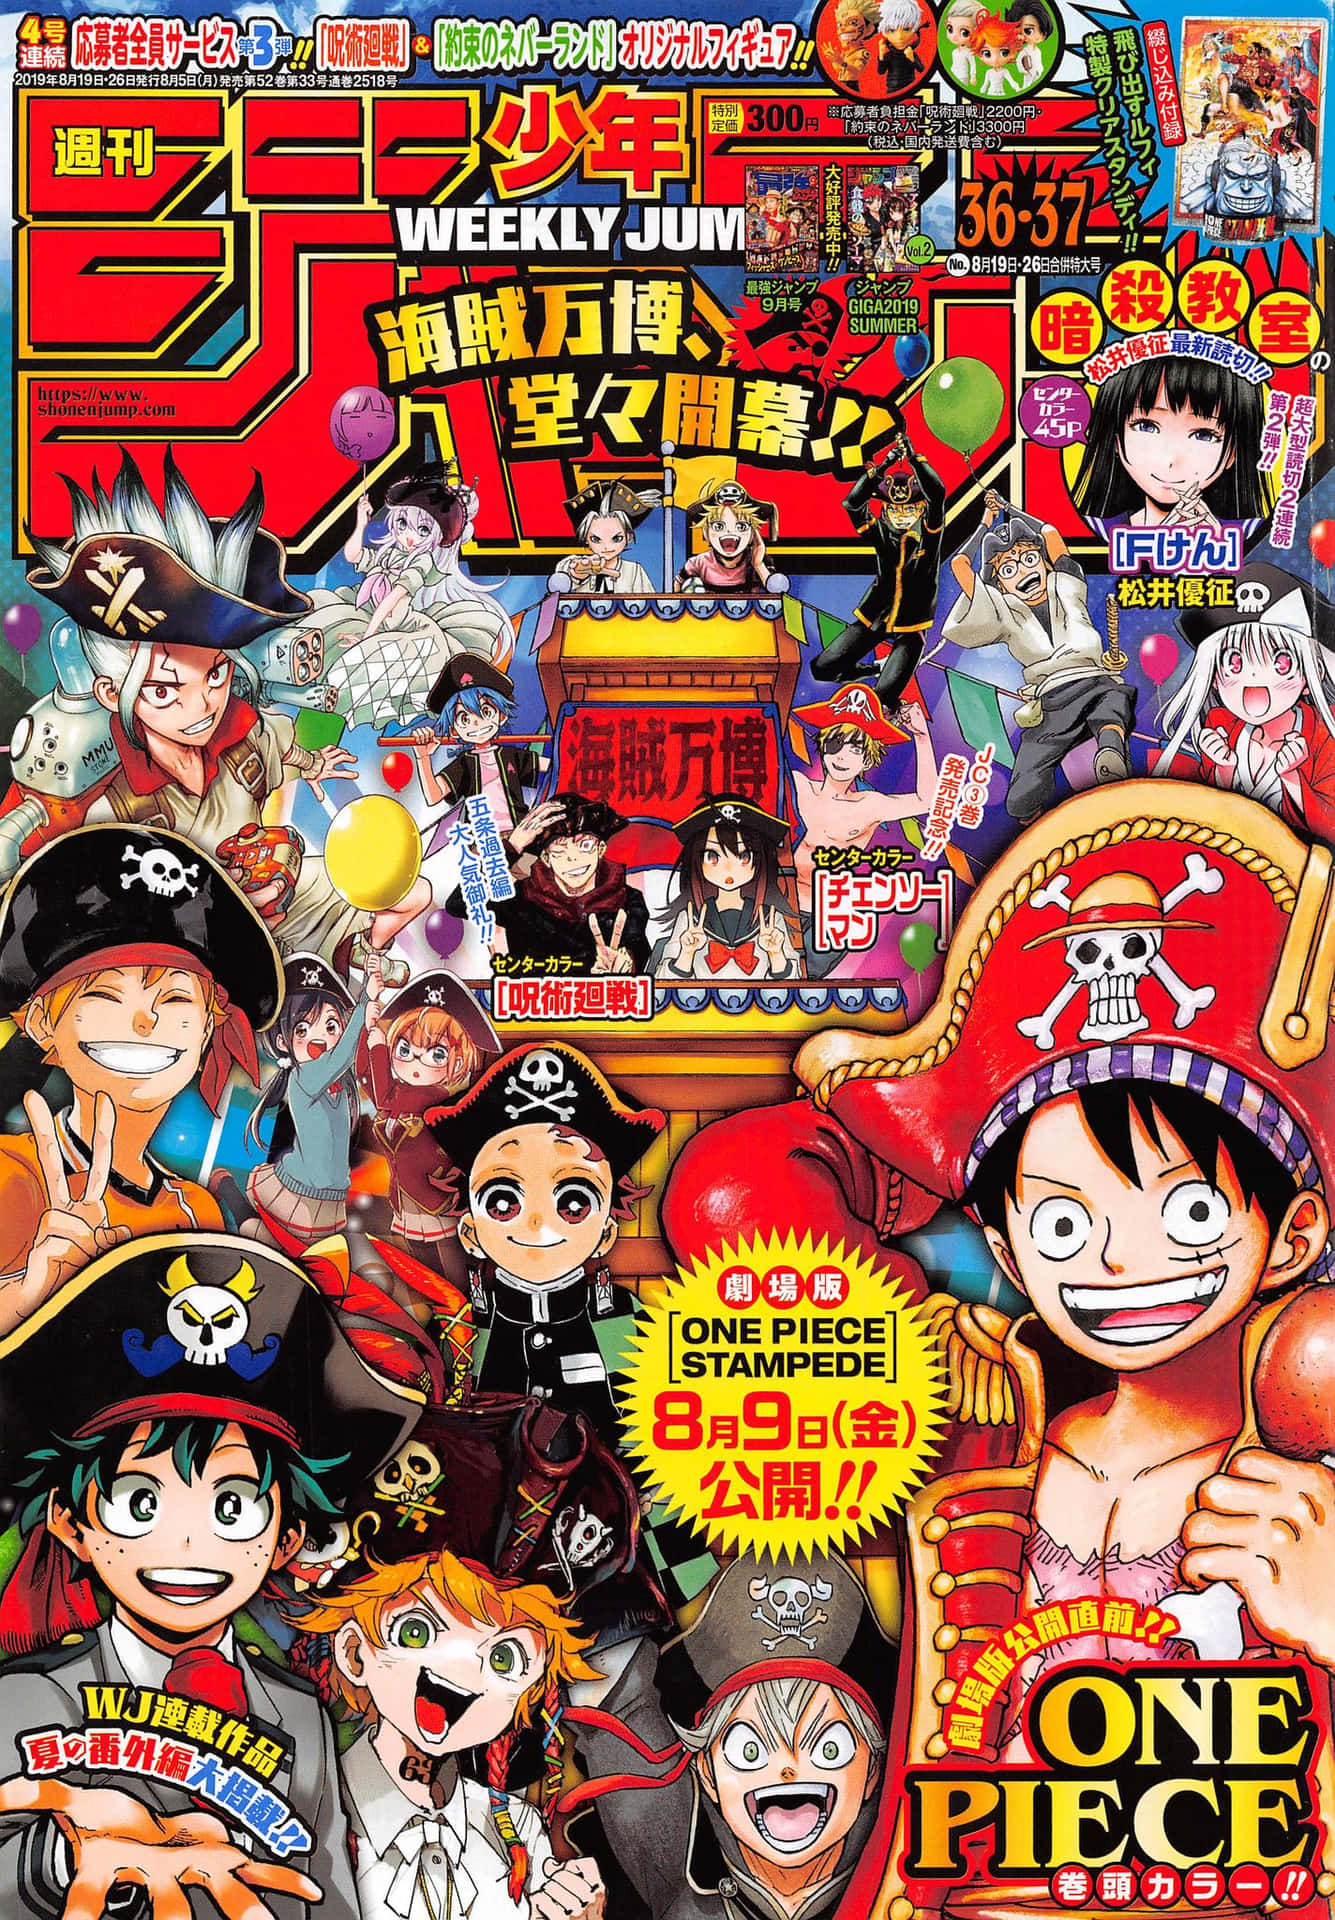 Get lost in new worlds with Shonen Jump Wallpaper